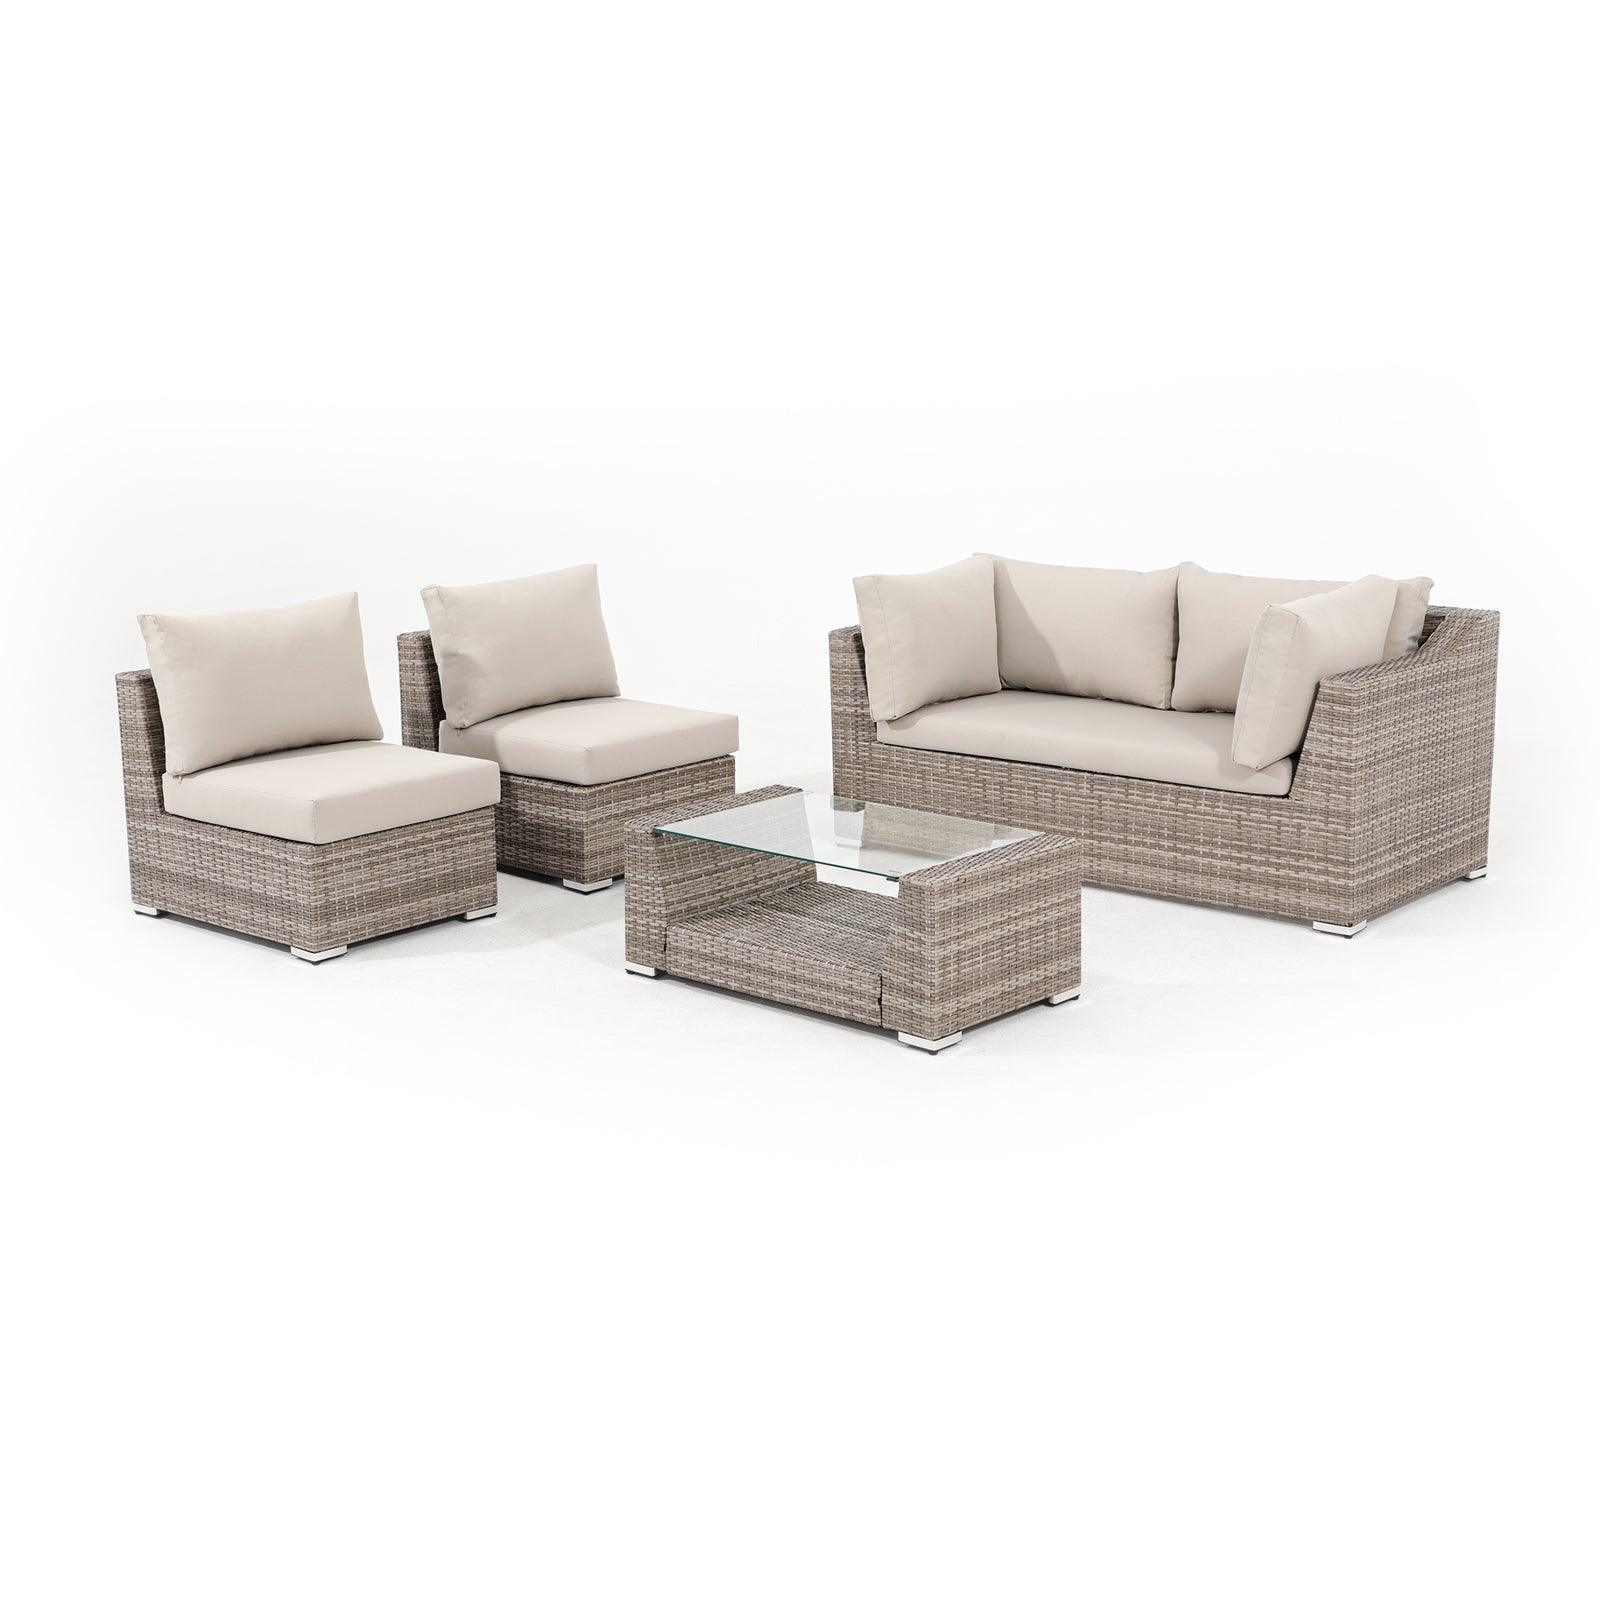 Elba Grey Rattan Outdoor Sectional Sofa Set with grey cushions, 1 two-seater sofa, 2 single armless sofas, 1 rectangular coffee table with glass tabletop, Side view  - Jardina Furniture